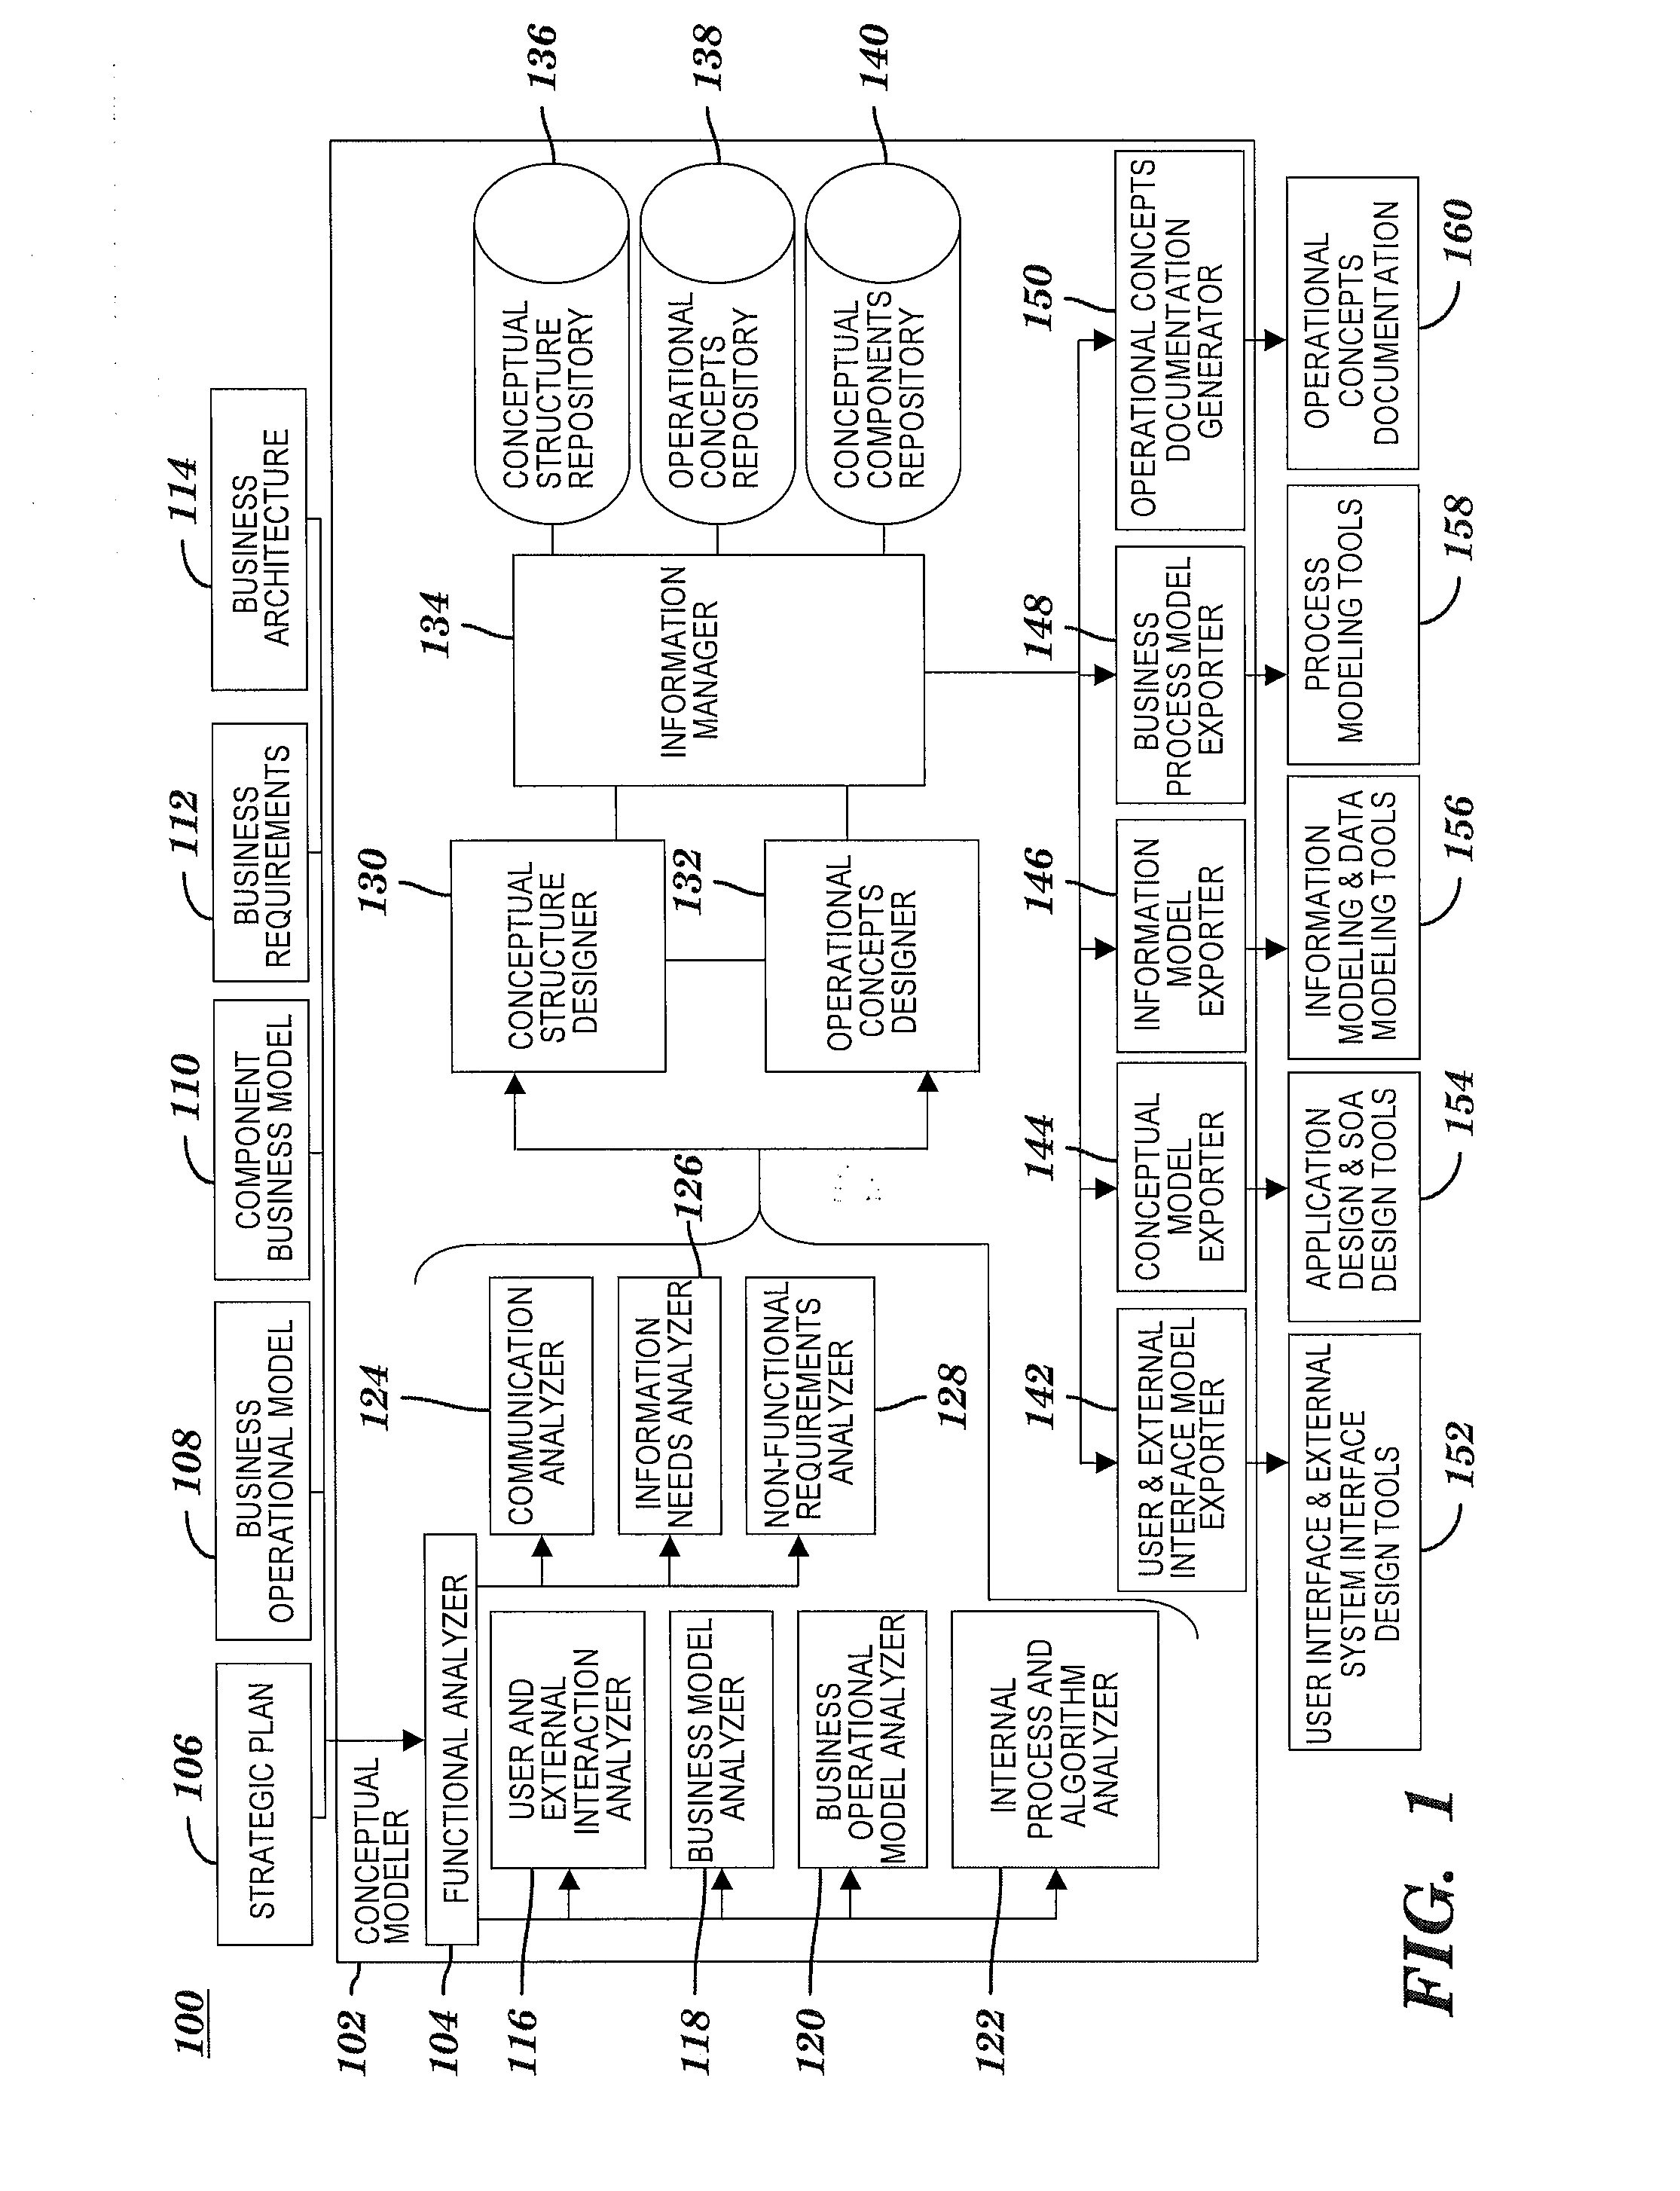 Method and system for developing a conceptual model to facilitate generating a business-aligned information technology solution